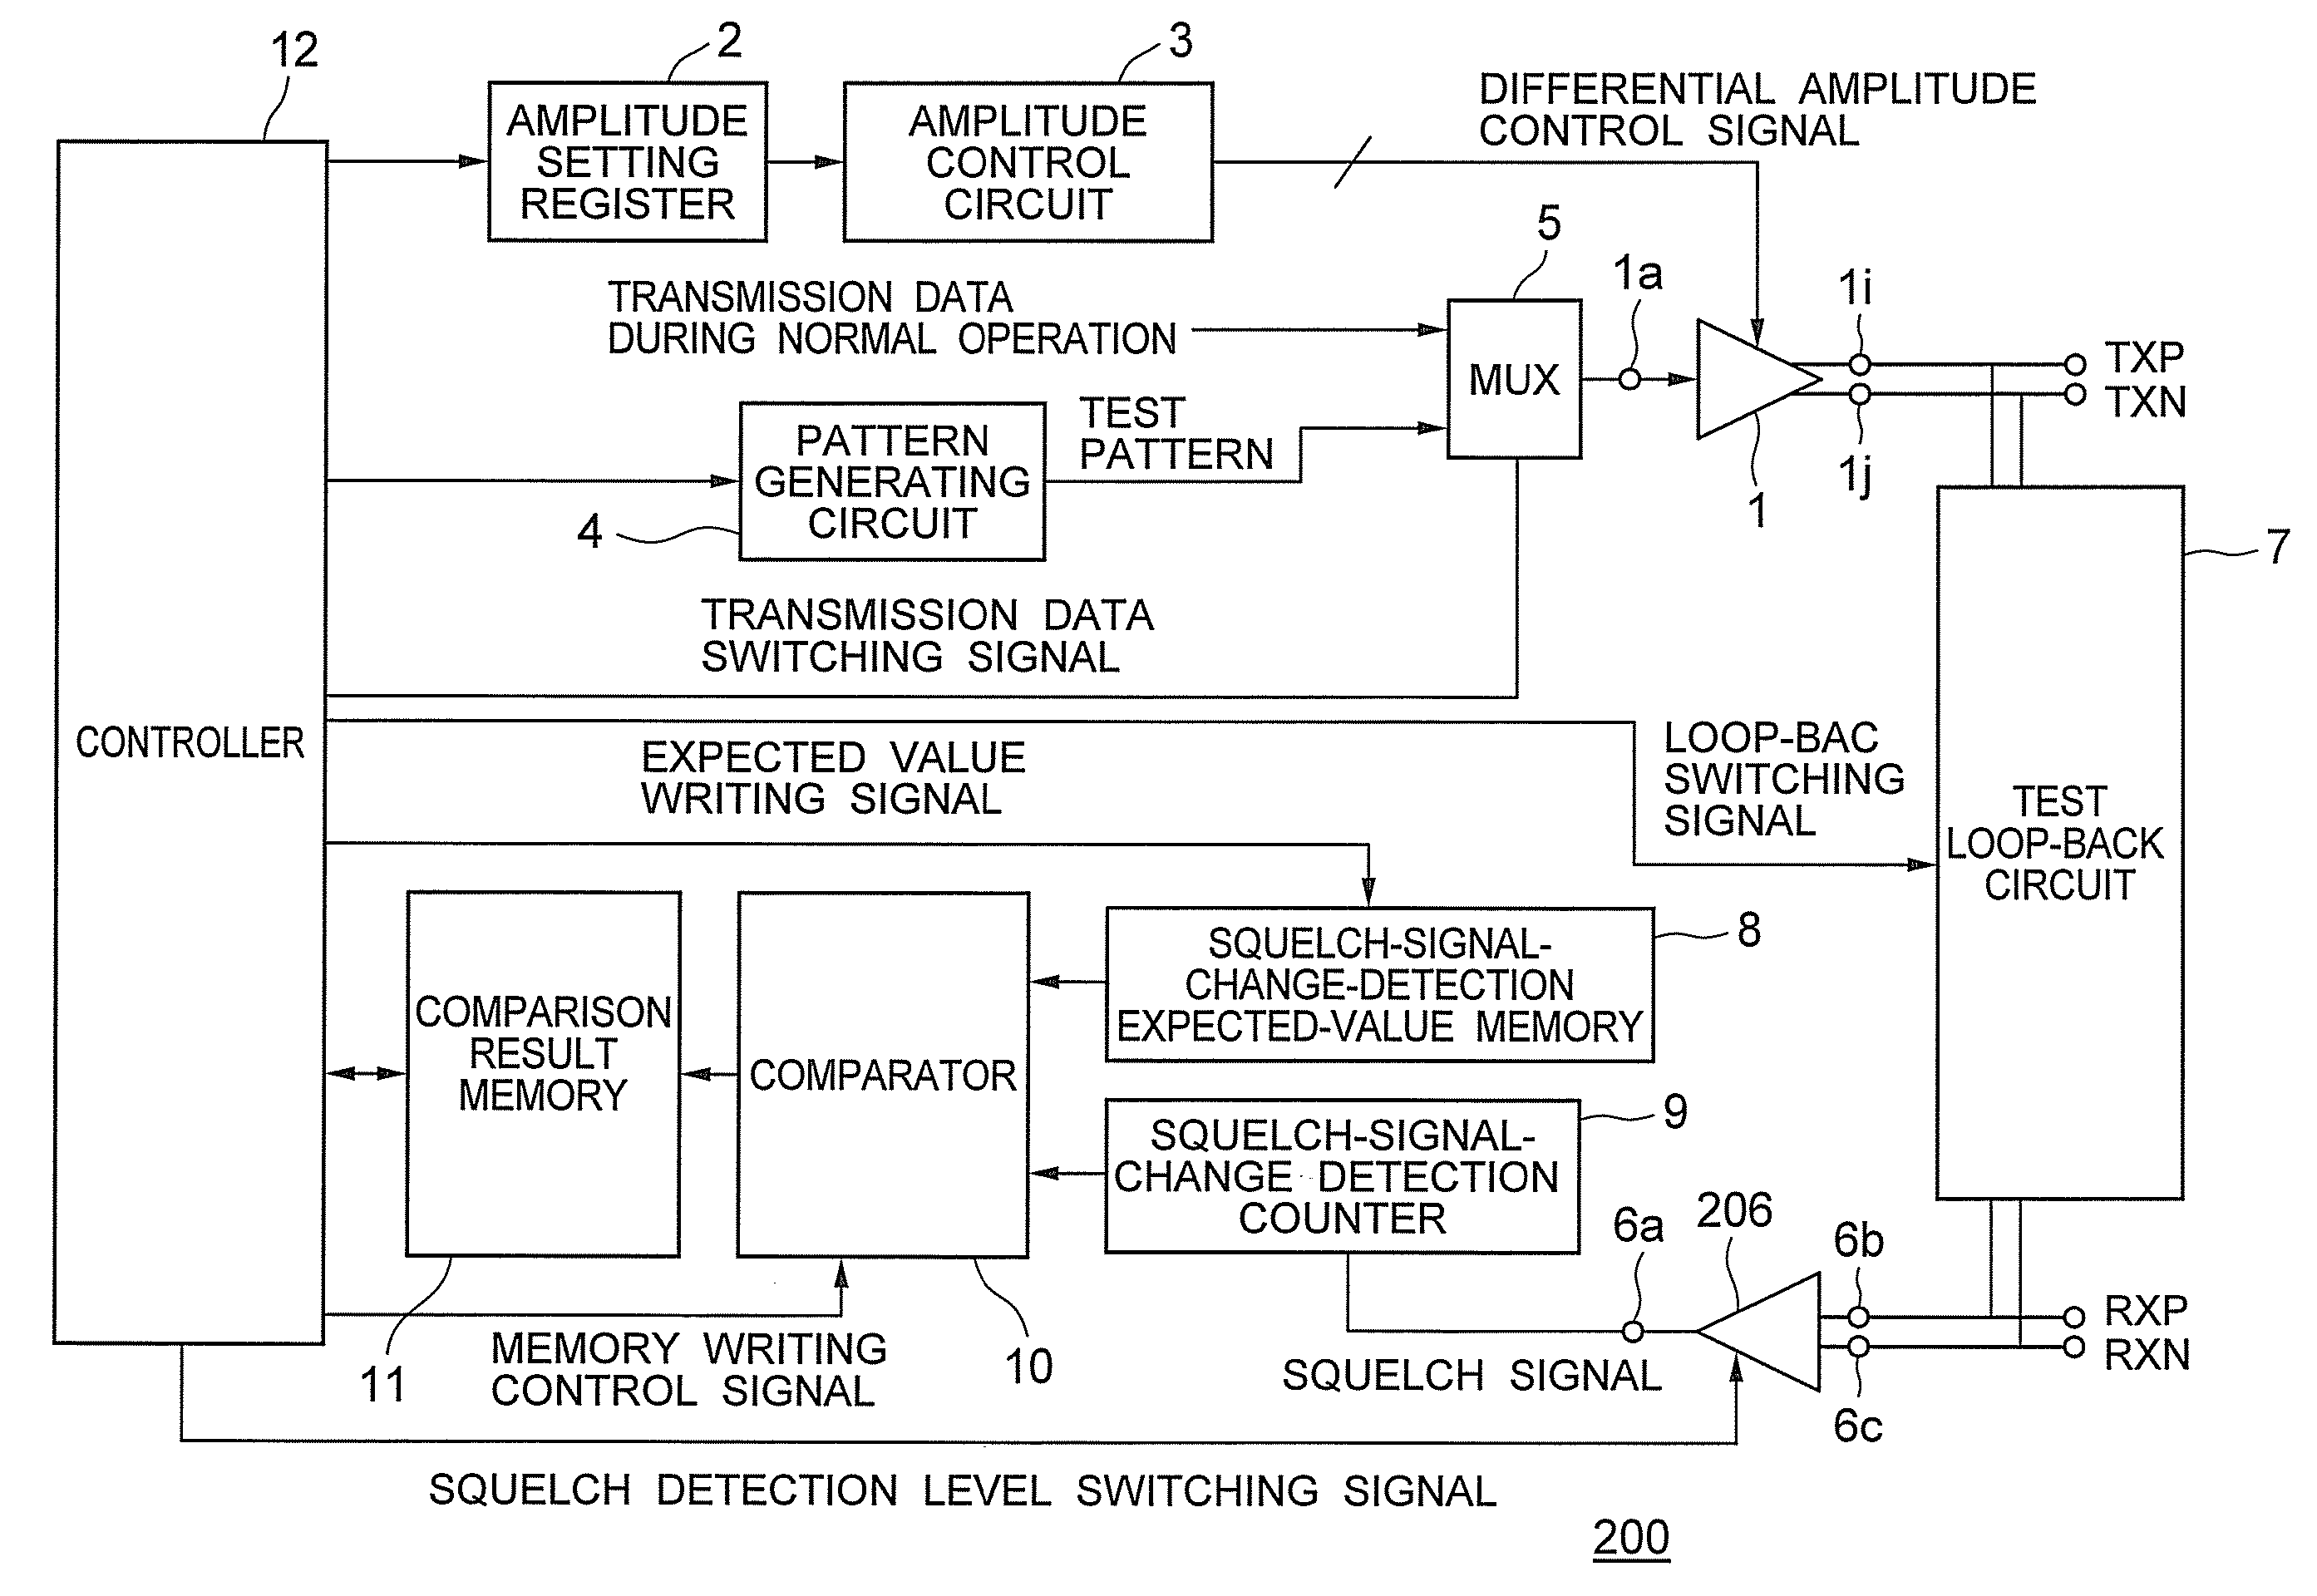 Automatic adjustment circuit for amplitude of differential signal